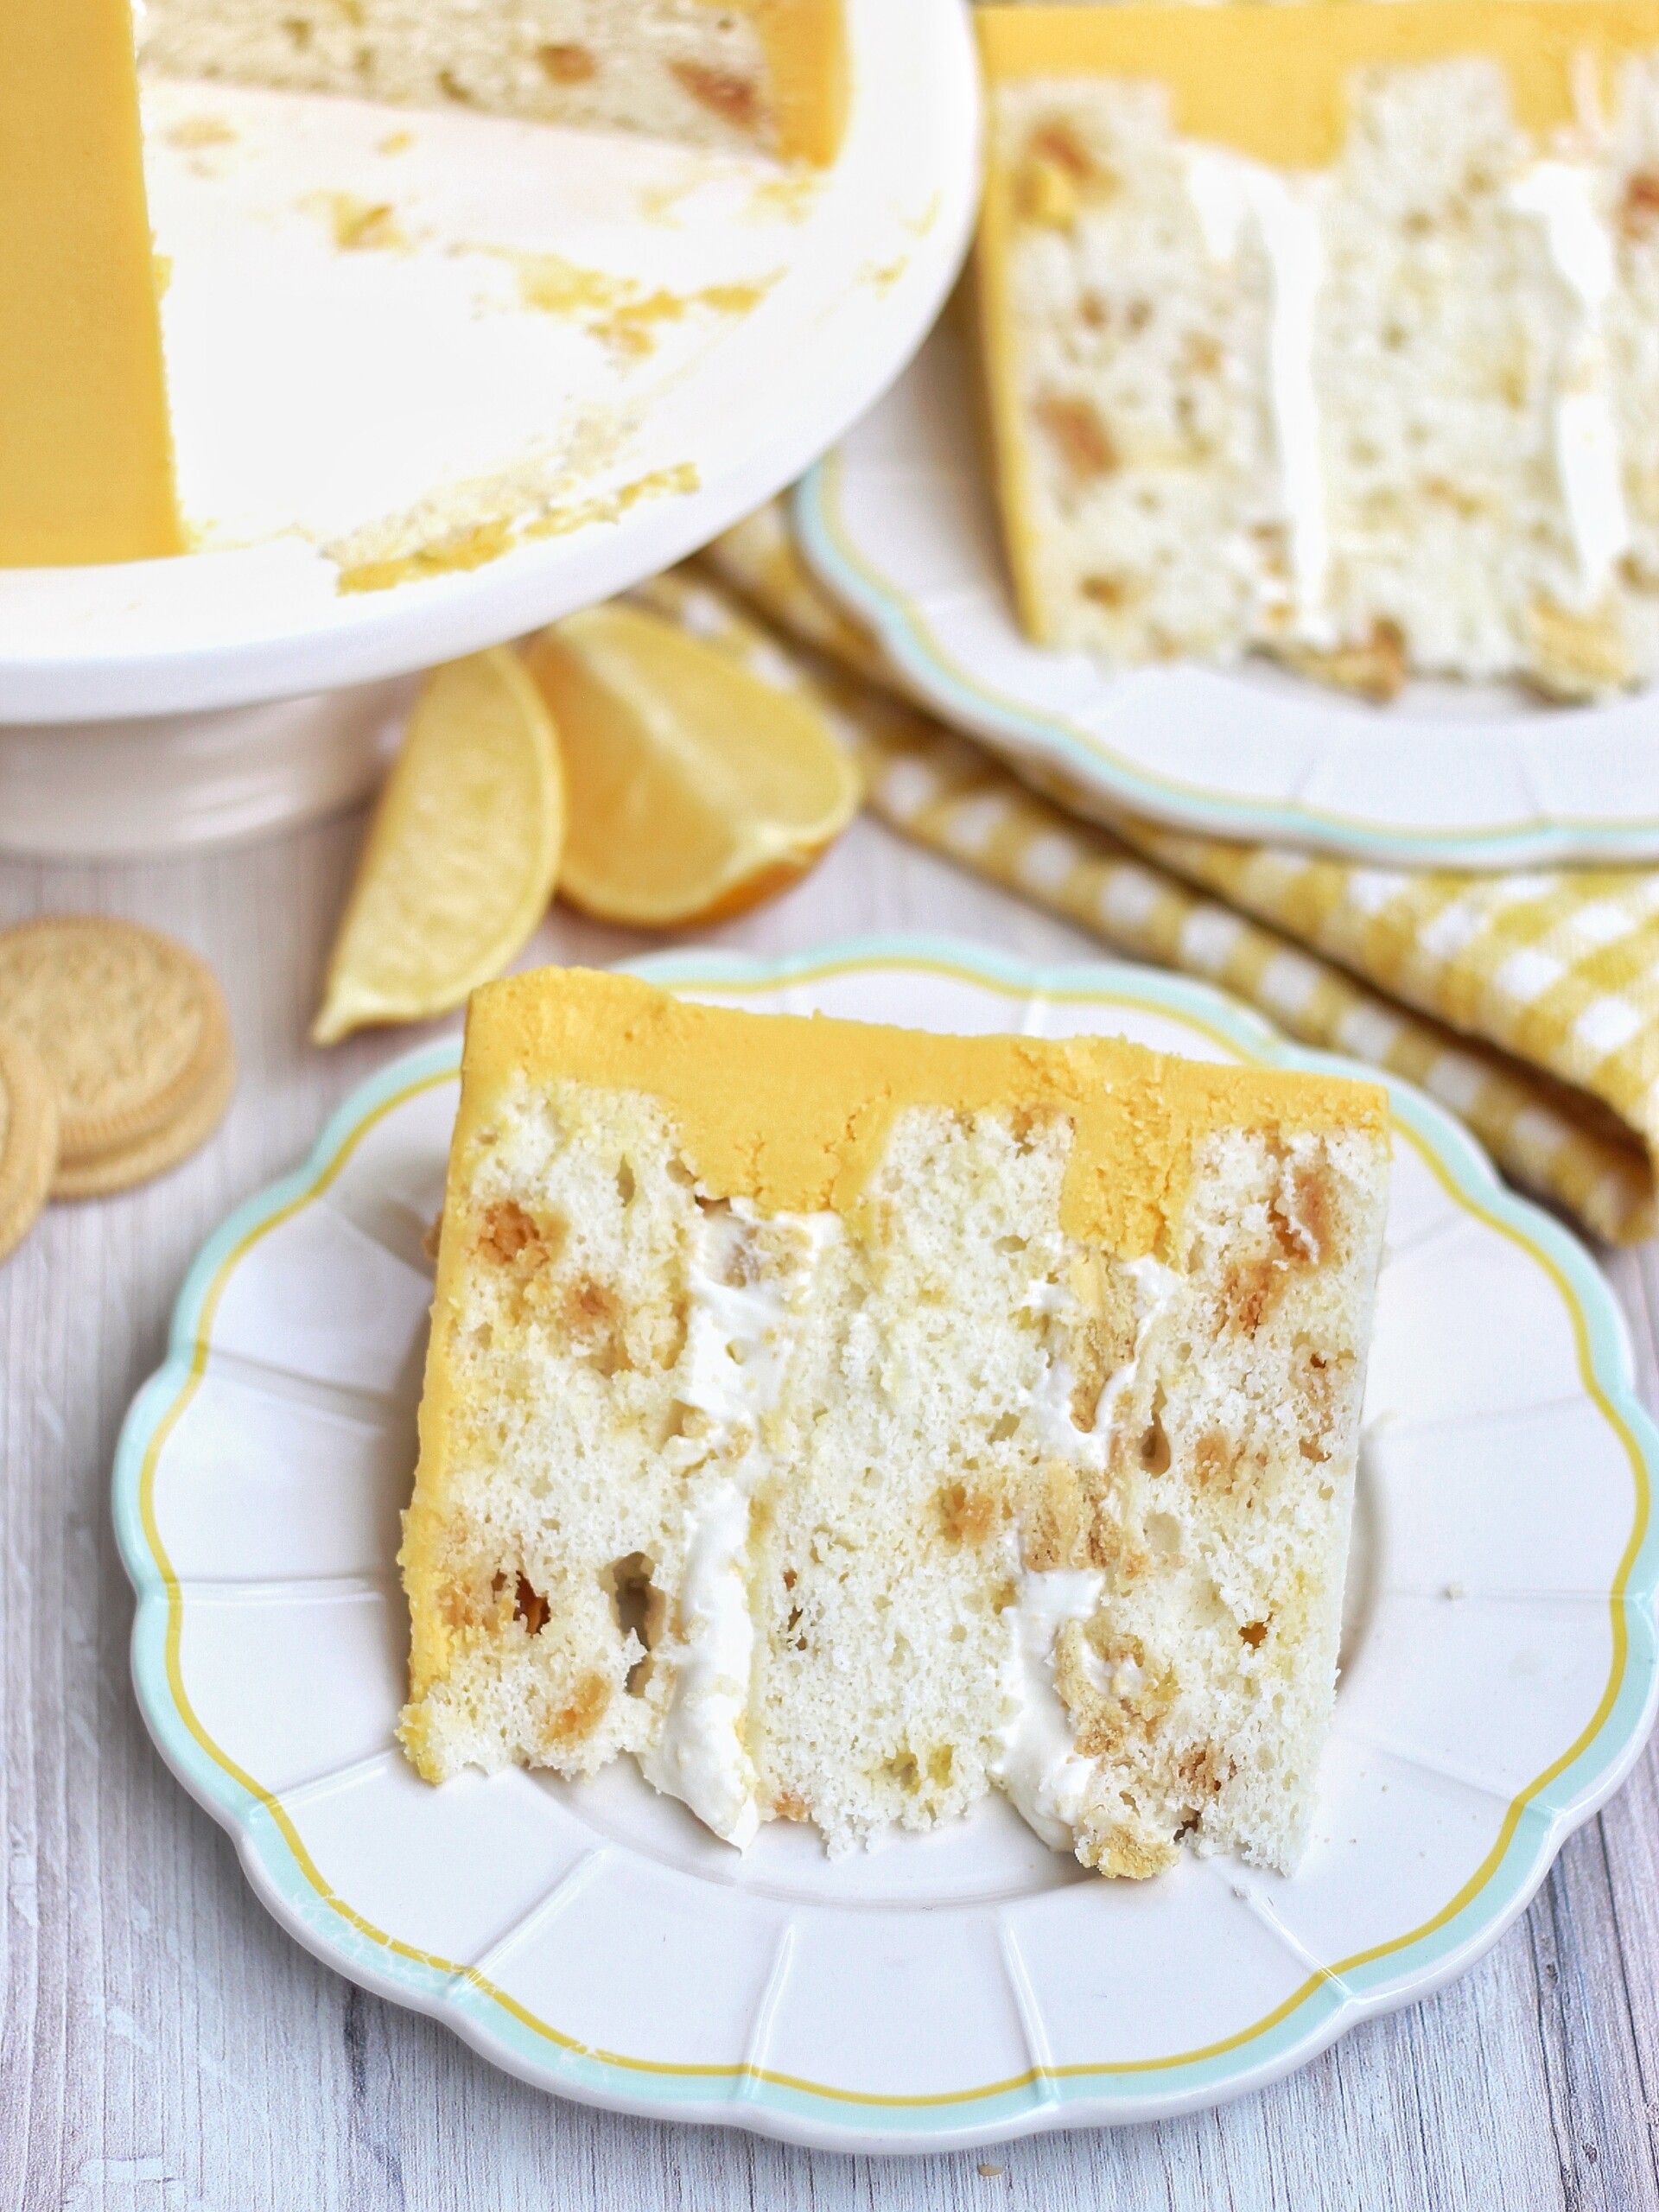 The most delicious lemon cake made with lemon Oreo cake layers, whipped cream cheese filling and lemon buttercream.